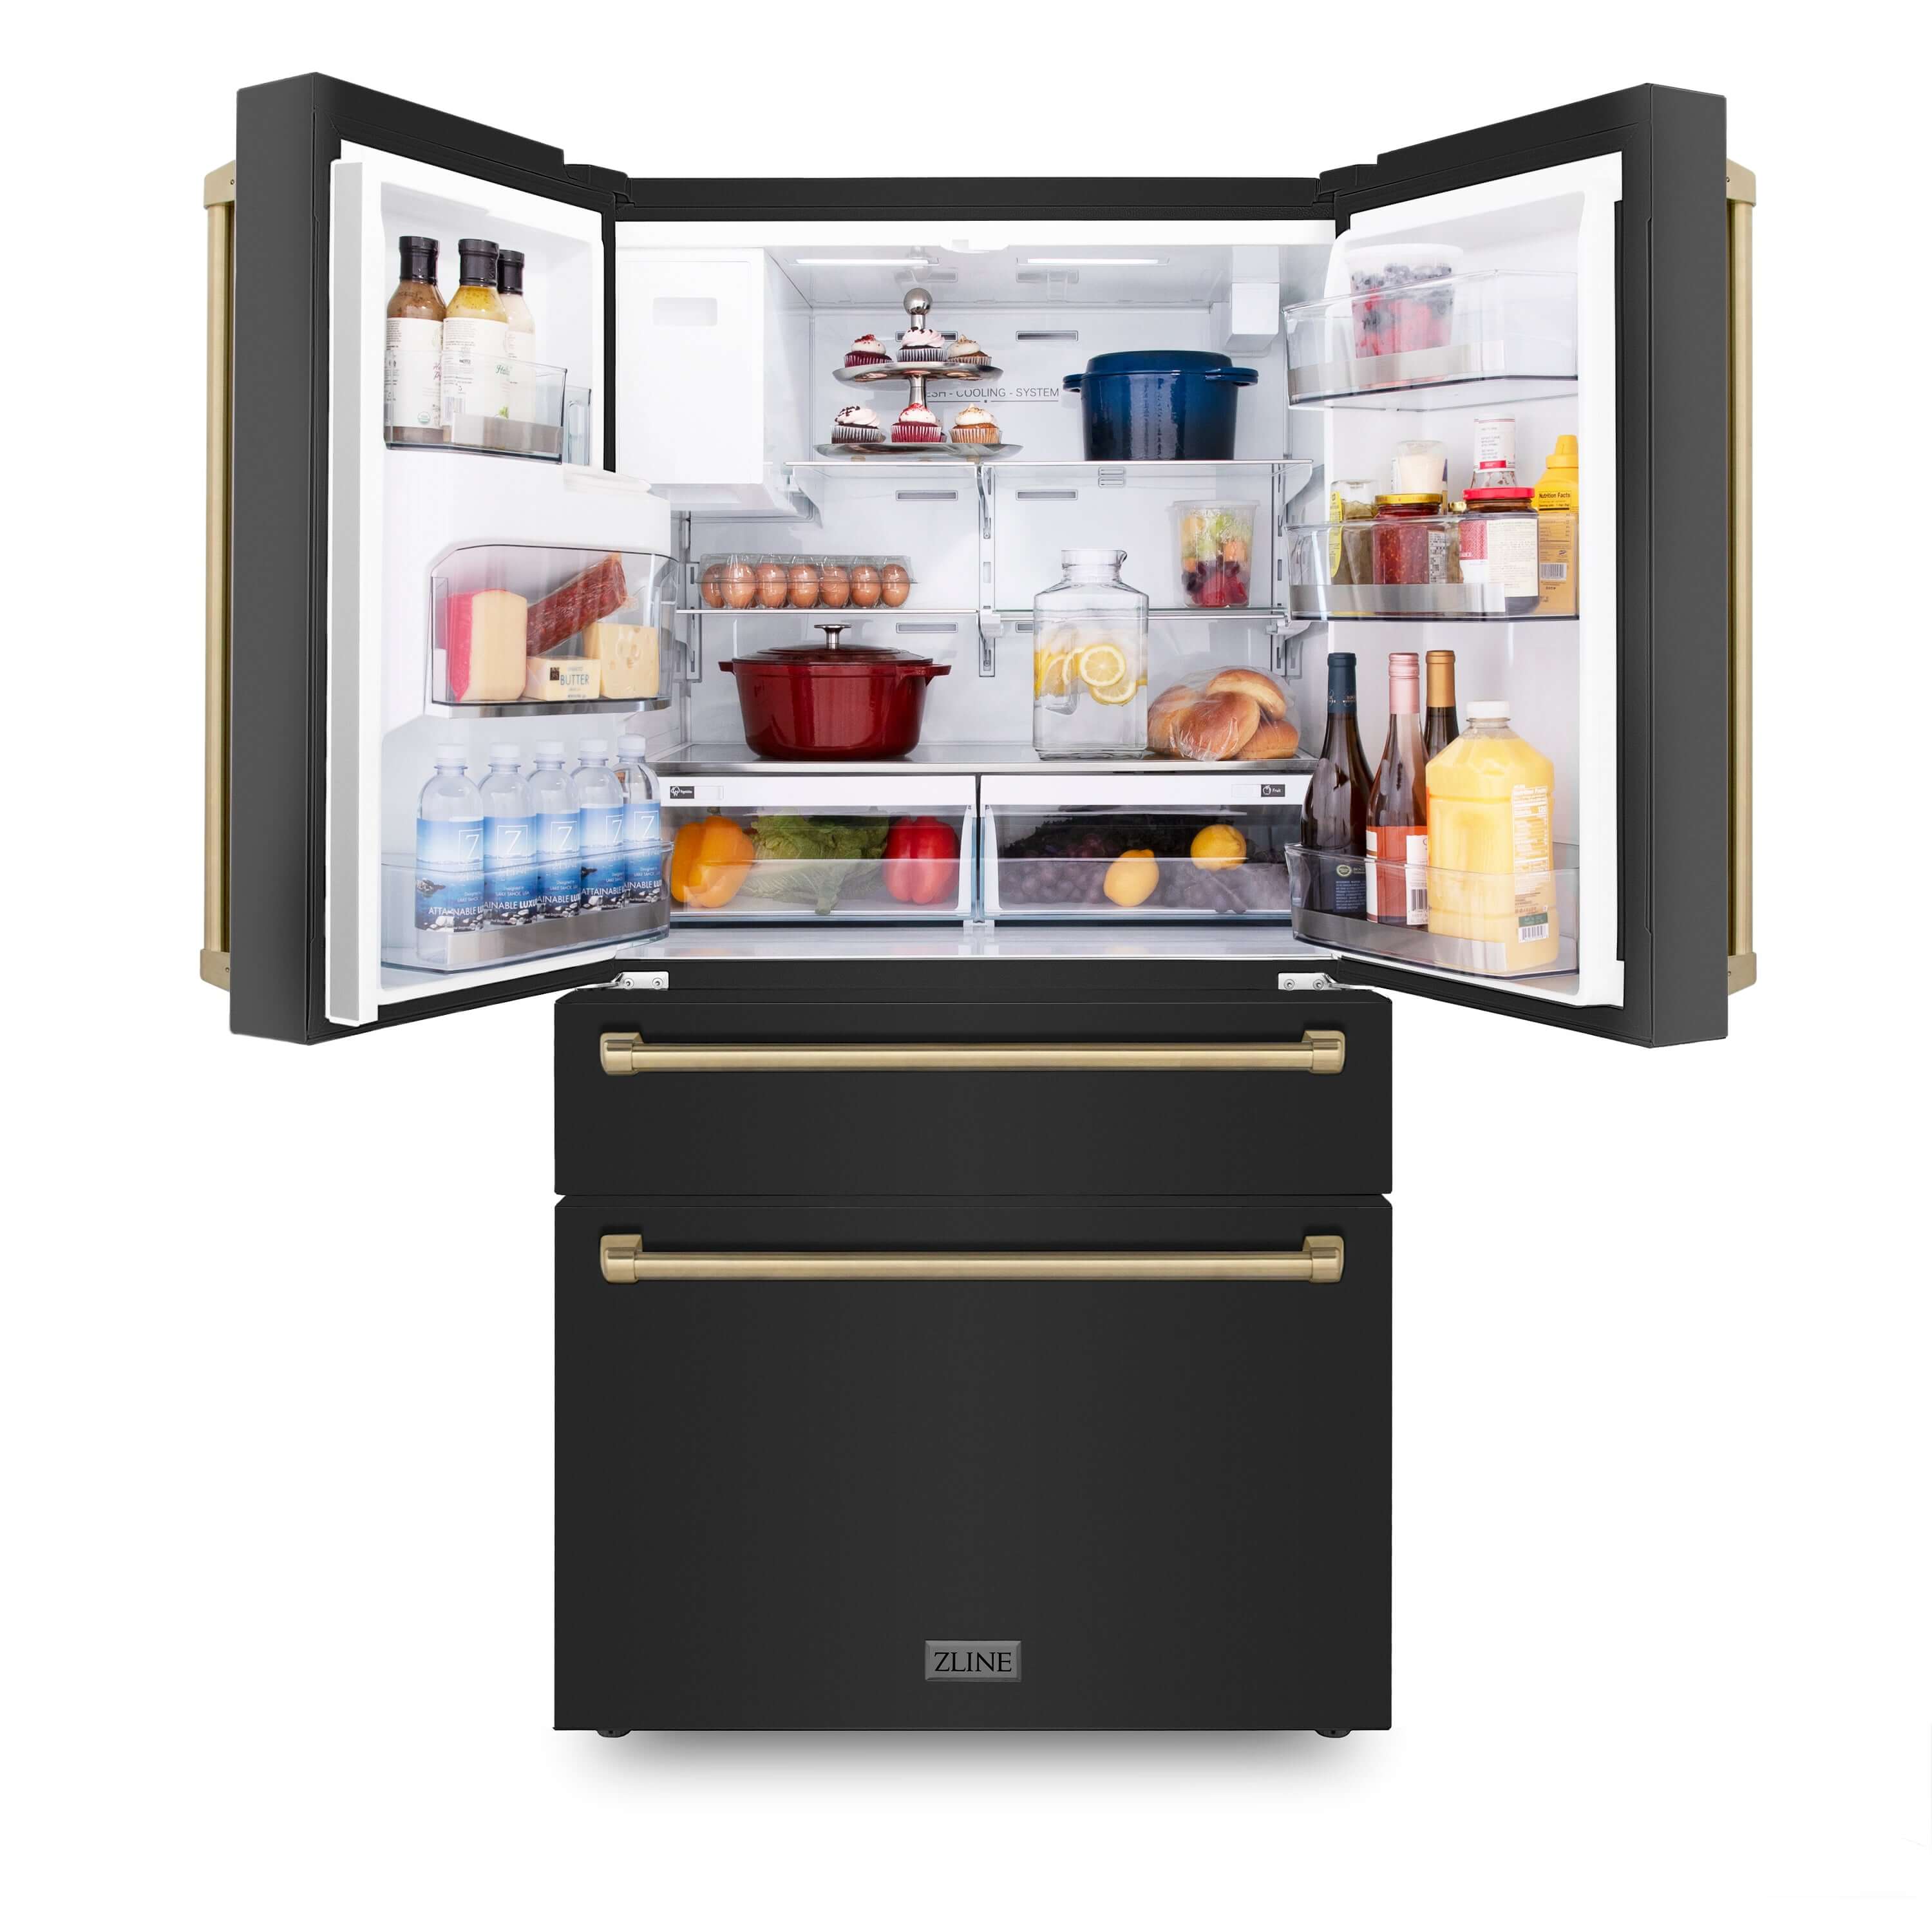 ZLINE 36 in. Autograph Edition French Door Refrigerator in Black Stainless Steel with Champagne Bronze Accents (RFMZ-W-36-BS-CB) front with doors open and food inside illuminated by built-in LED lighting.